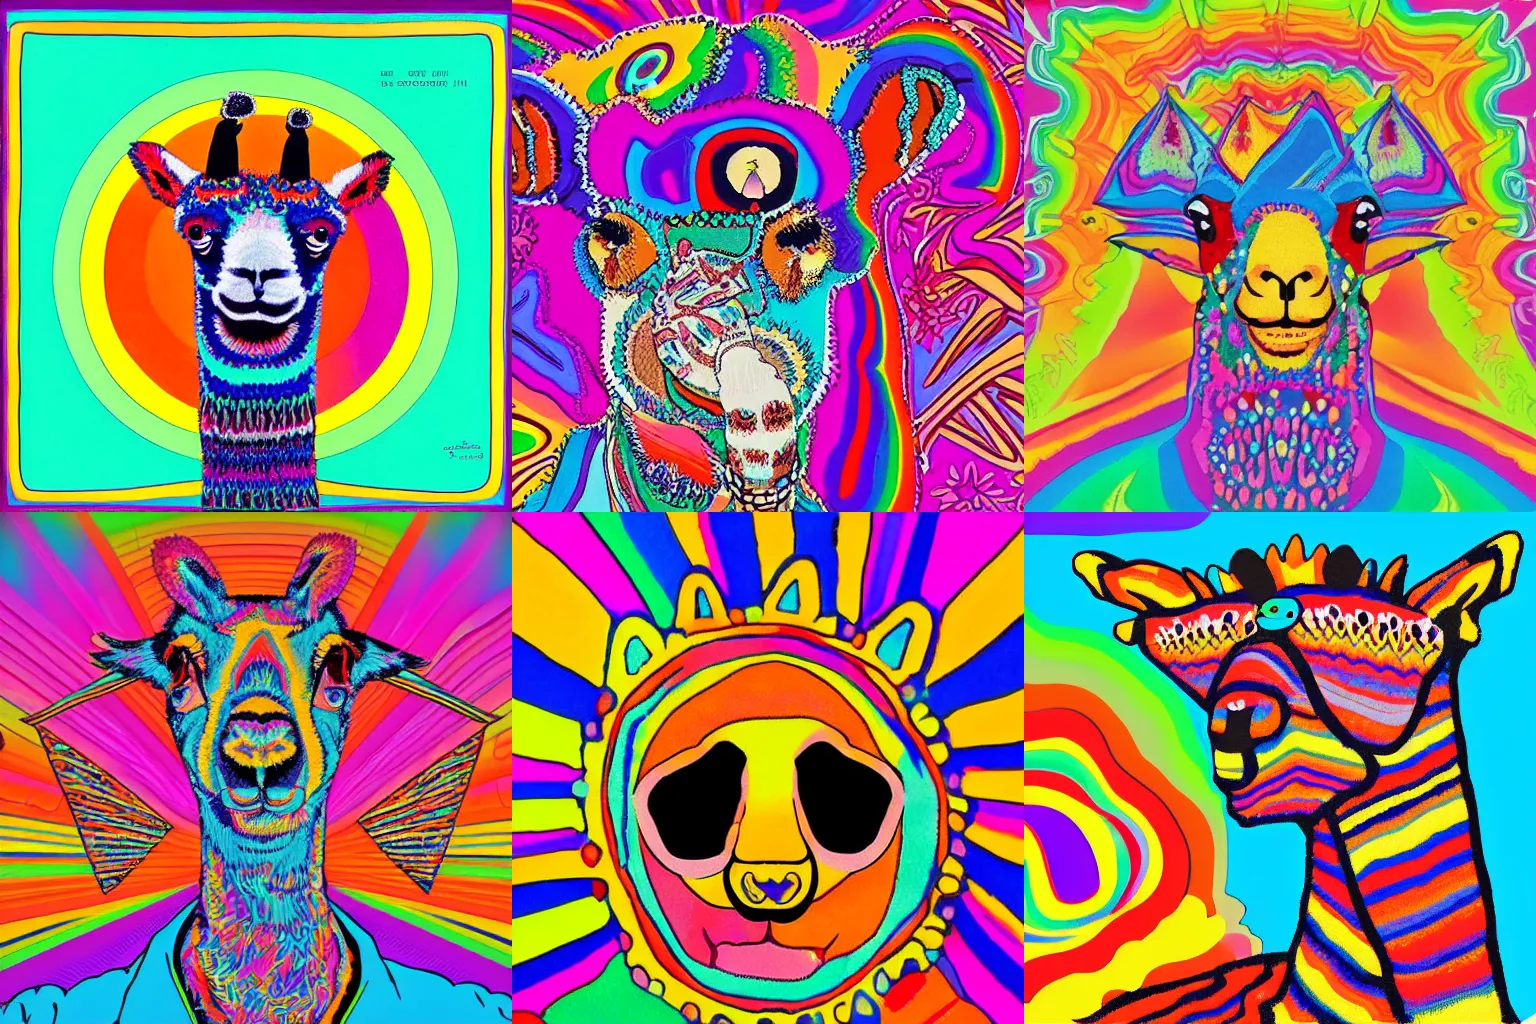 Prompt: psychedelic and colorful 60s album cover featuring a cartoon alpaca with buckteeth,